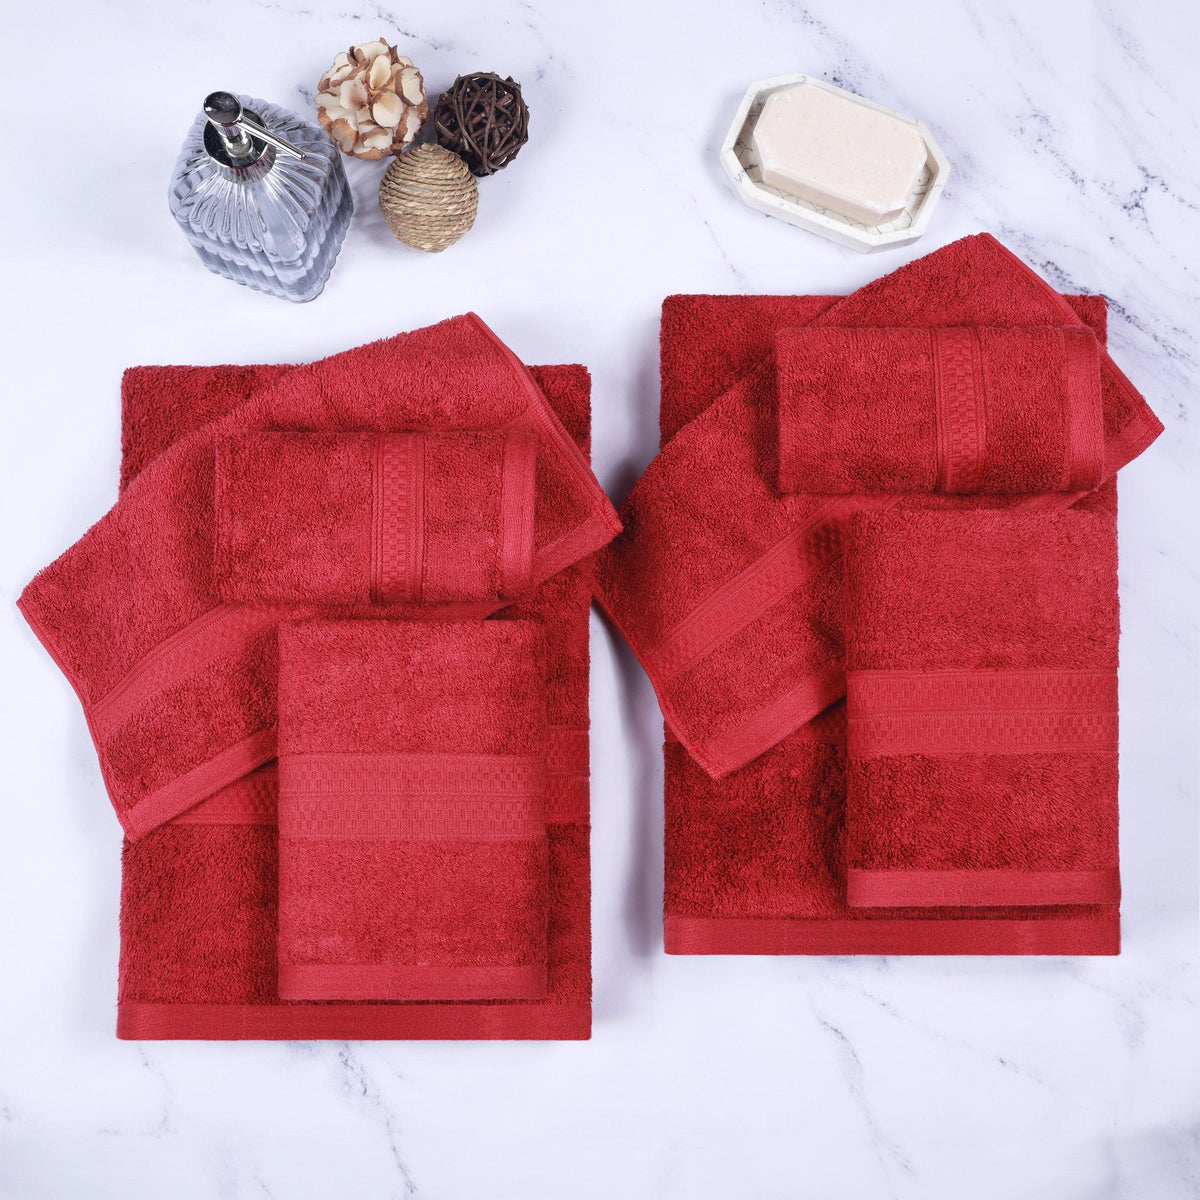  Ultra-Soft Hypoallergenic Rayon from Bamboo Cotton Blend Assorted Bath Towel Set - Crimson